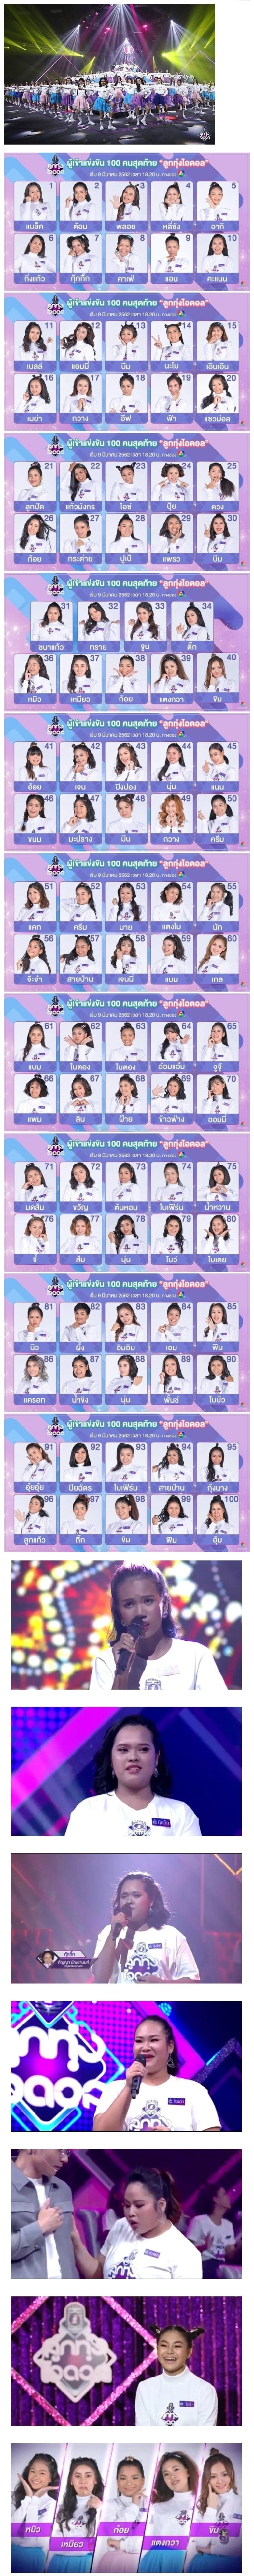 Produce 101 in Thailand